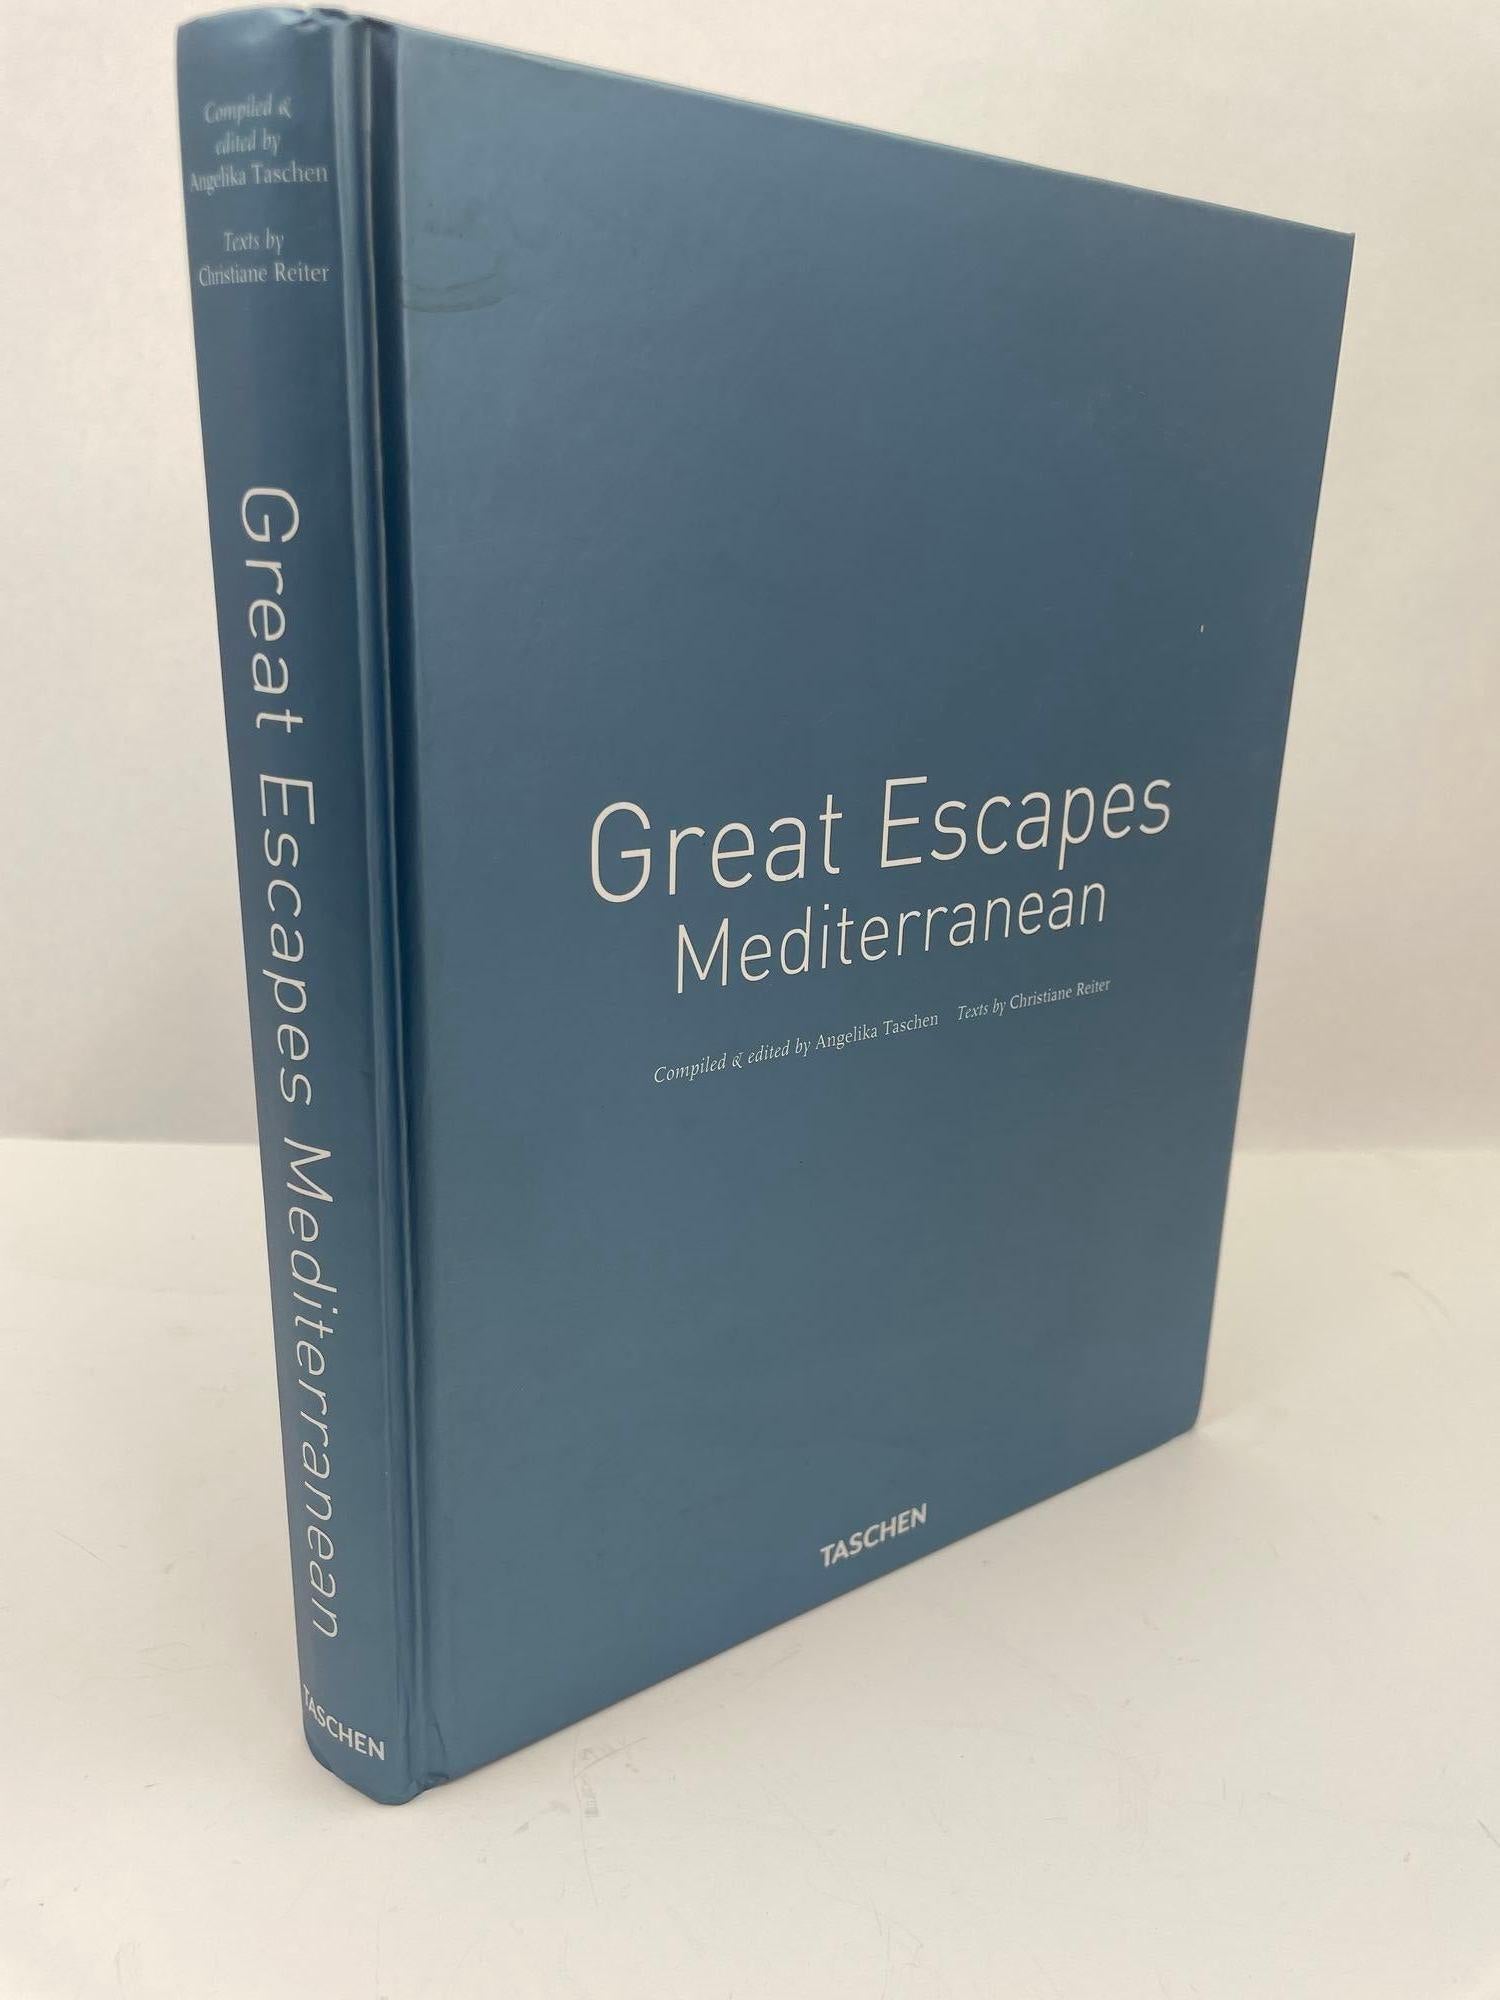 Great Escapes Mediterranean. The Hotel Book.
Explore the breathtaking destinations of the Mediterranean in this updated edition from TASCHEN’s Great Escapes series. From the cave-like suites at Perivolas on Santorini to the Hôtel Le Corbusier in